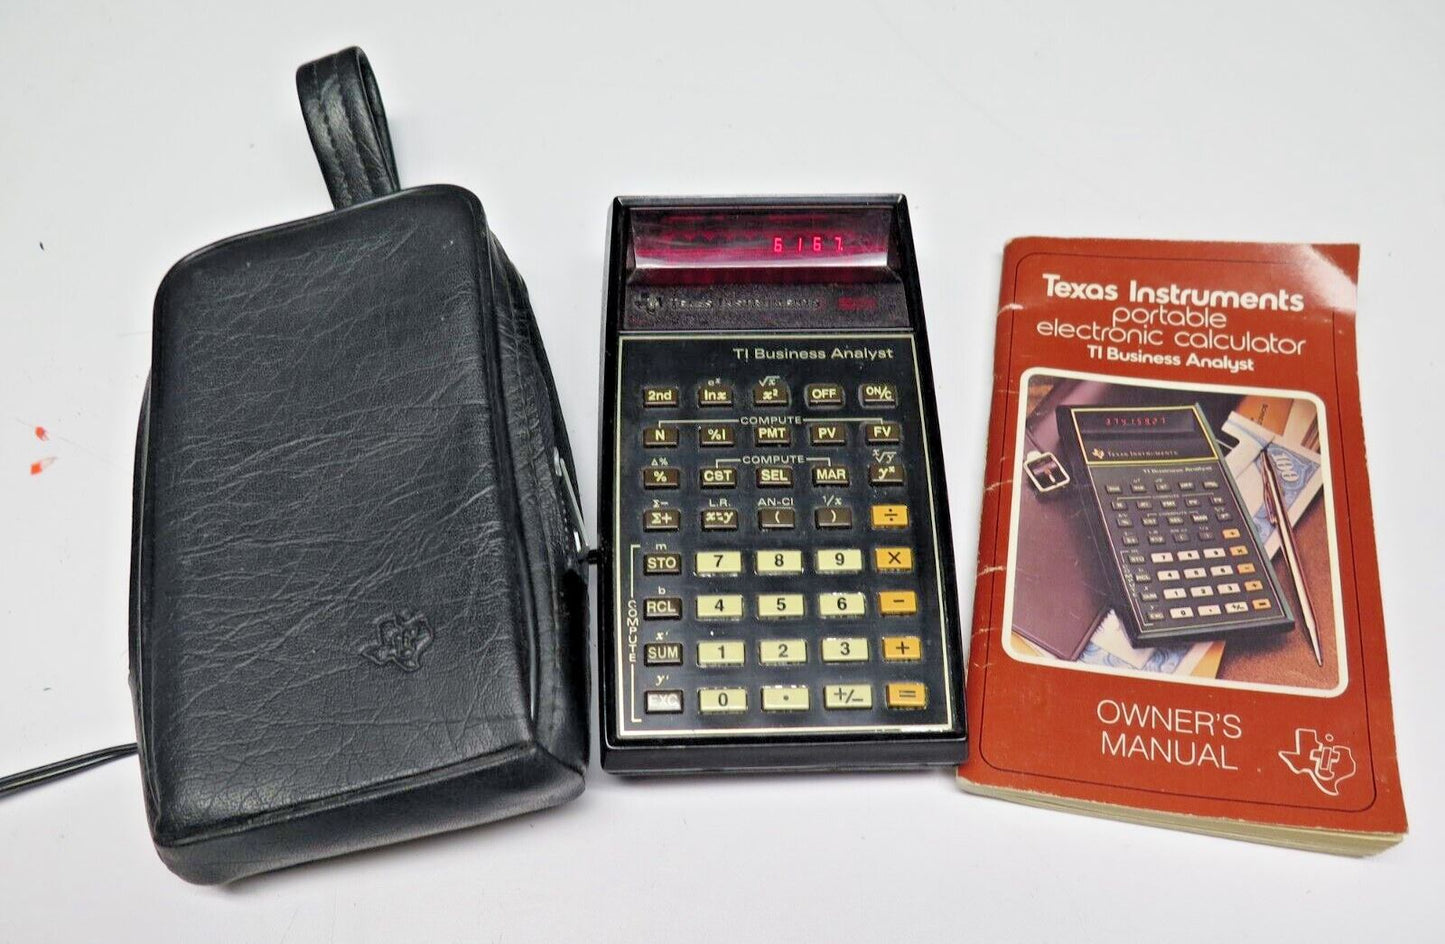 Vintage Texas Instruments TI Business Analyst Handheld Electronic Calculator '76